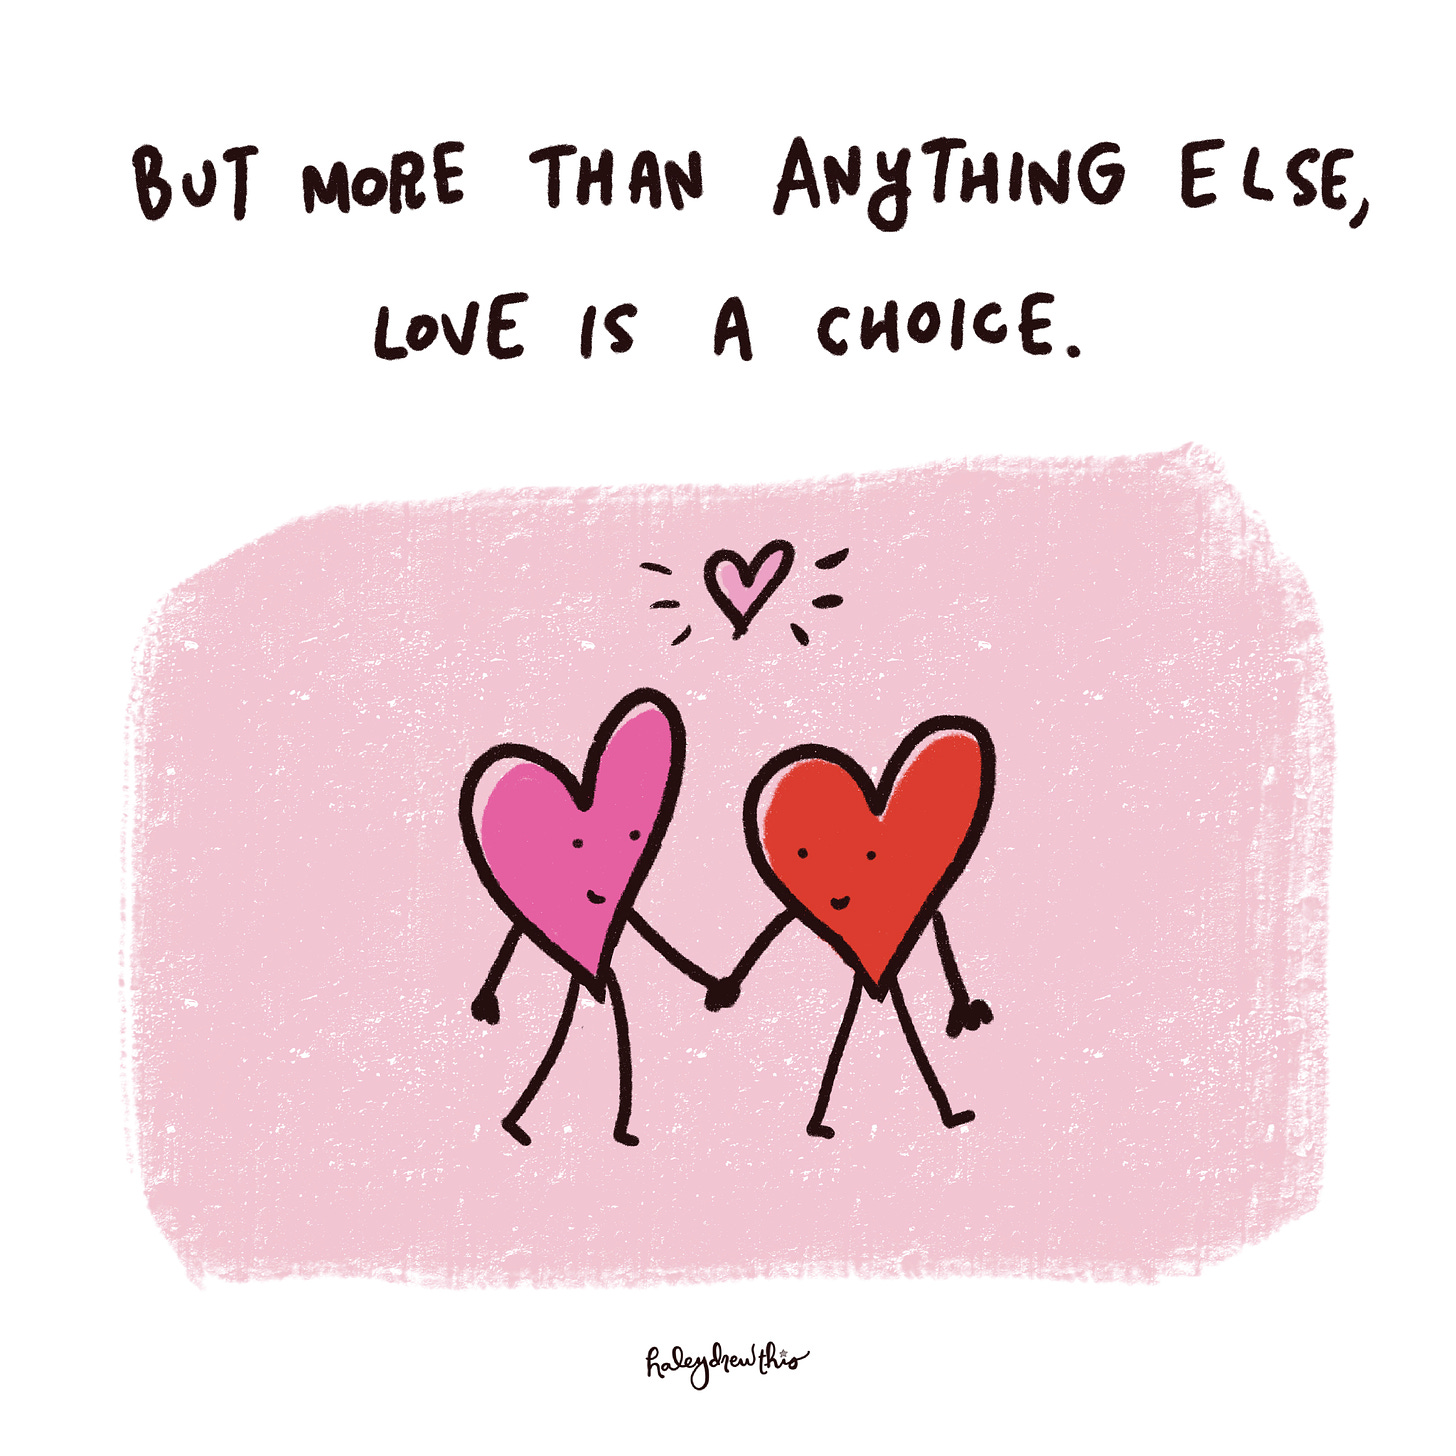 But more than anything else, love is a choice. 